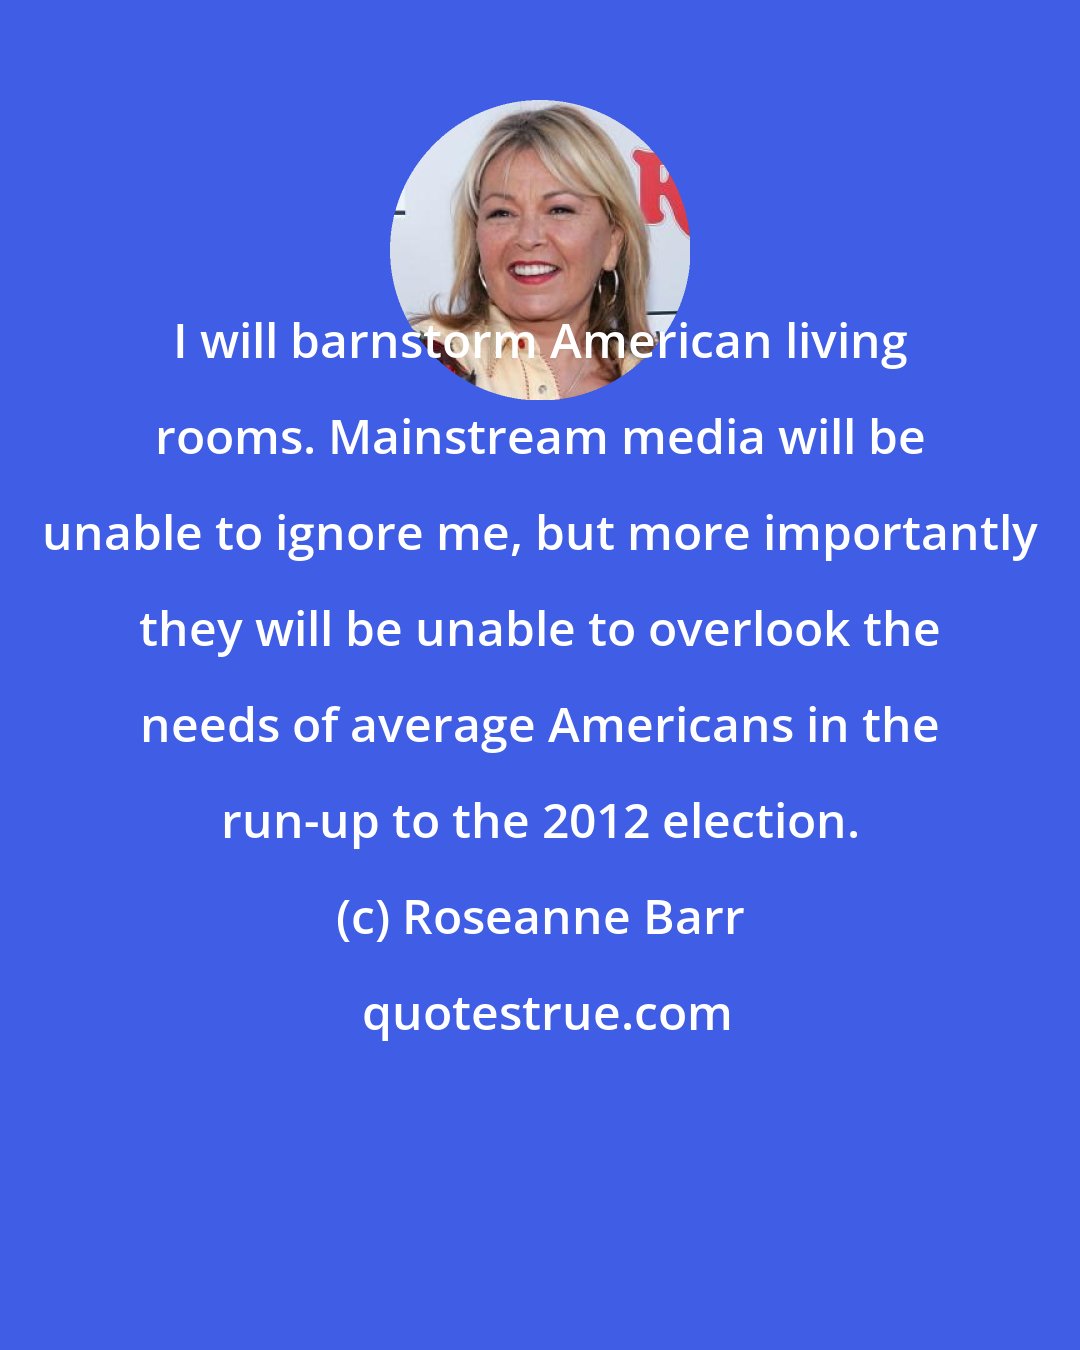 Roseanne Barr: I will barnstorm American living rooms. Mainstream media will be unable to ignore me, but more importantly they will be unable to overlook the needs of average Americans in the run-up to the 2012 election.